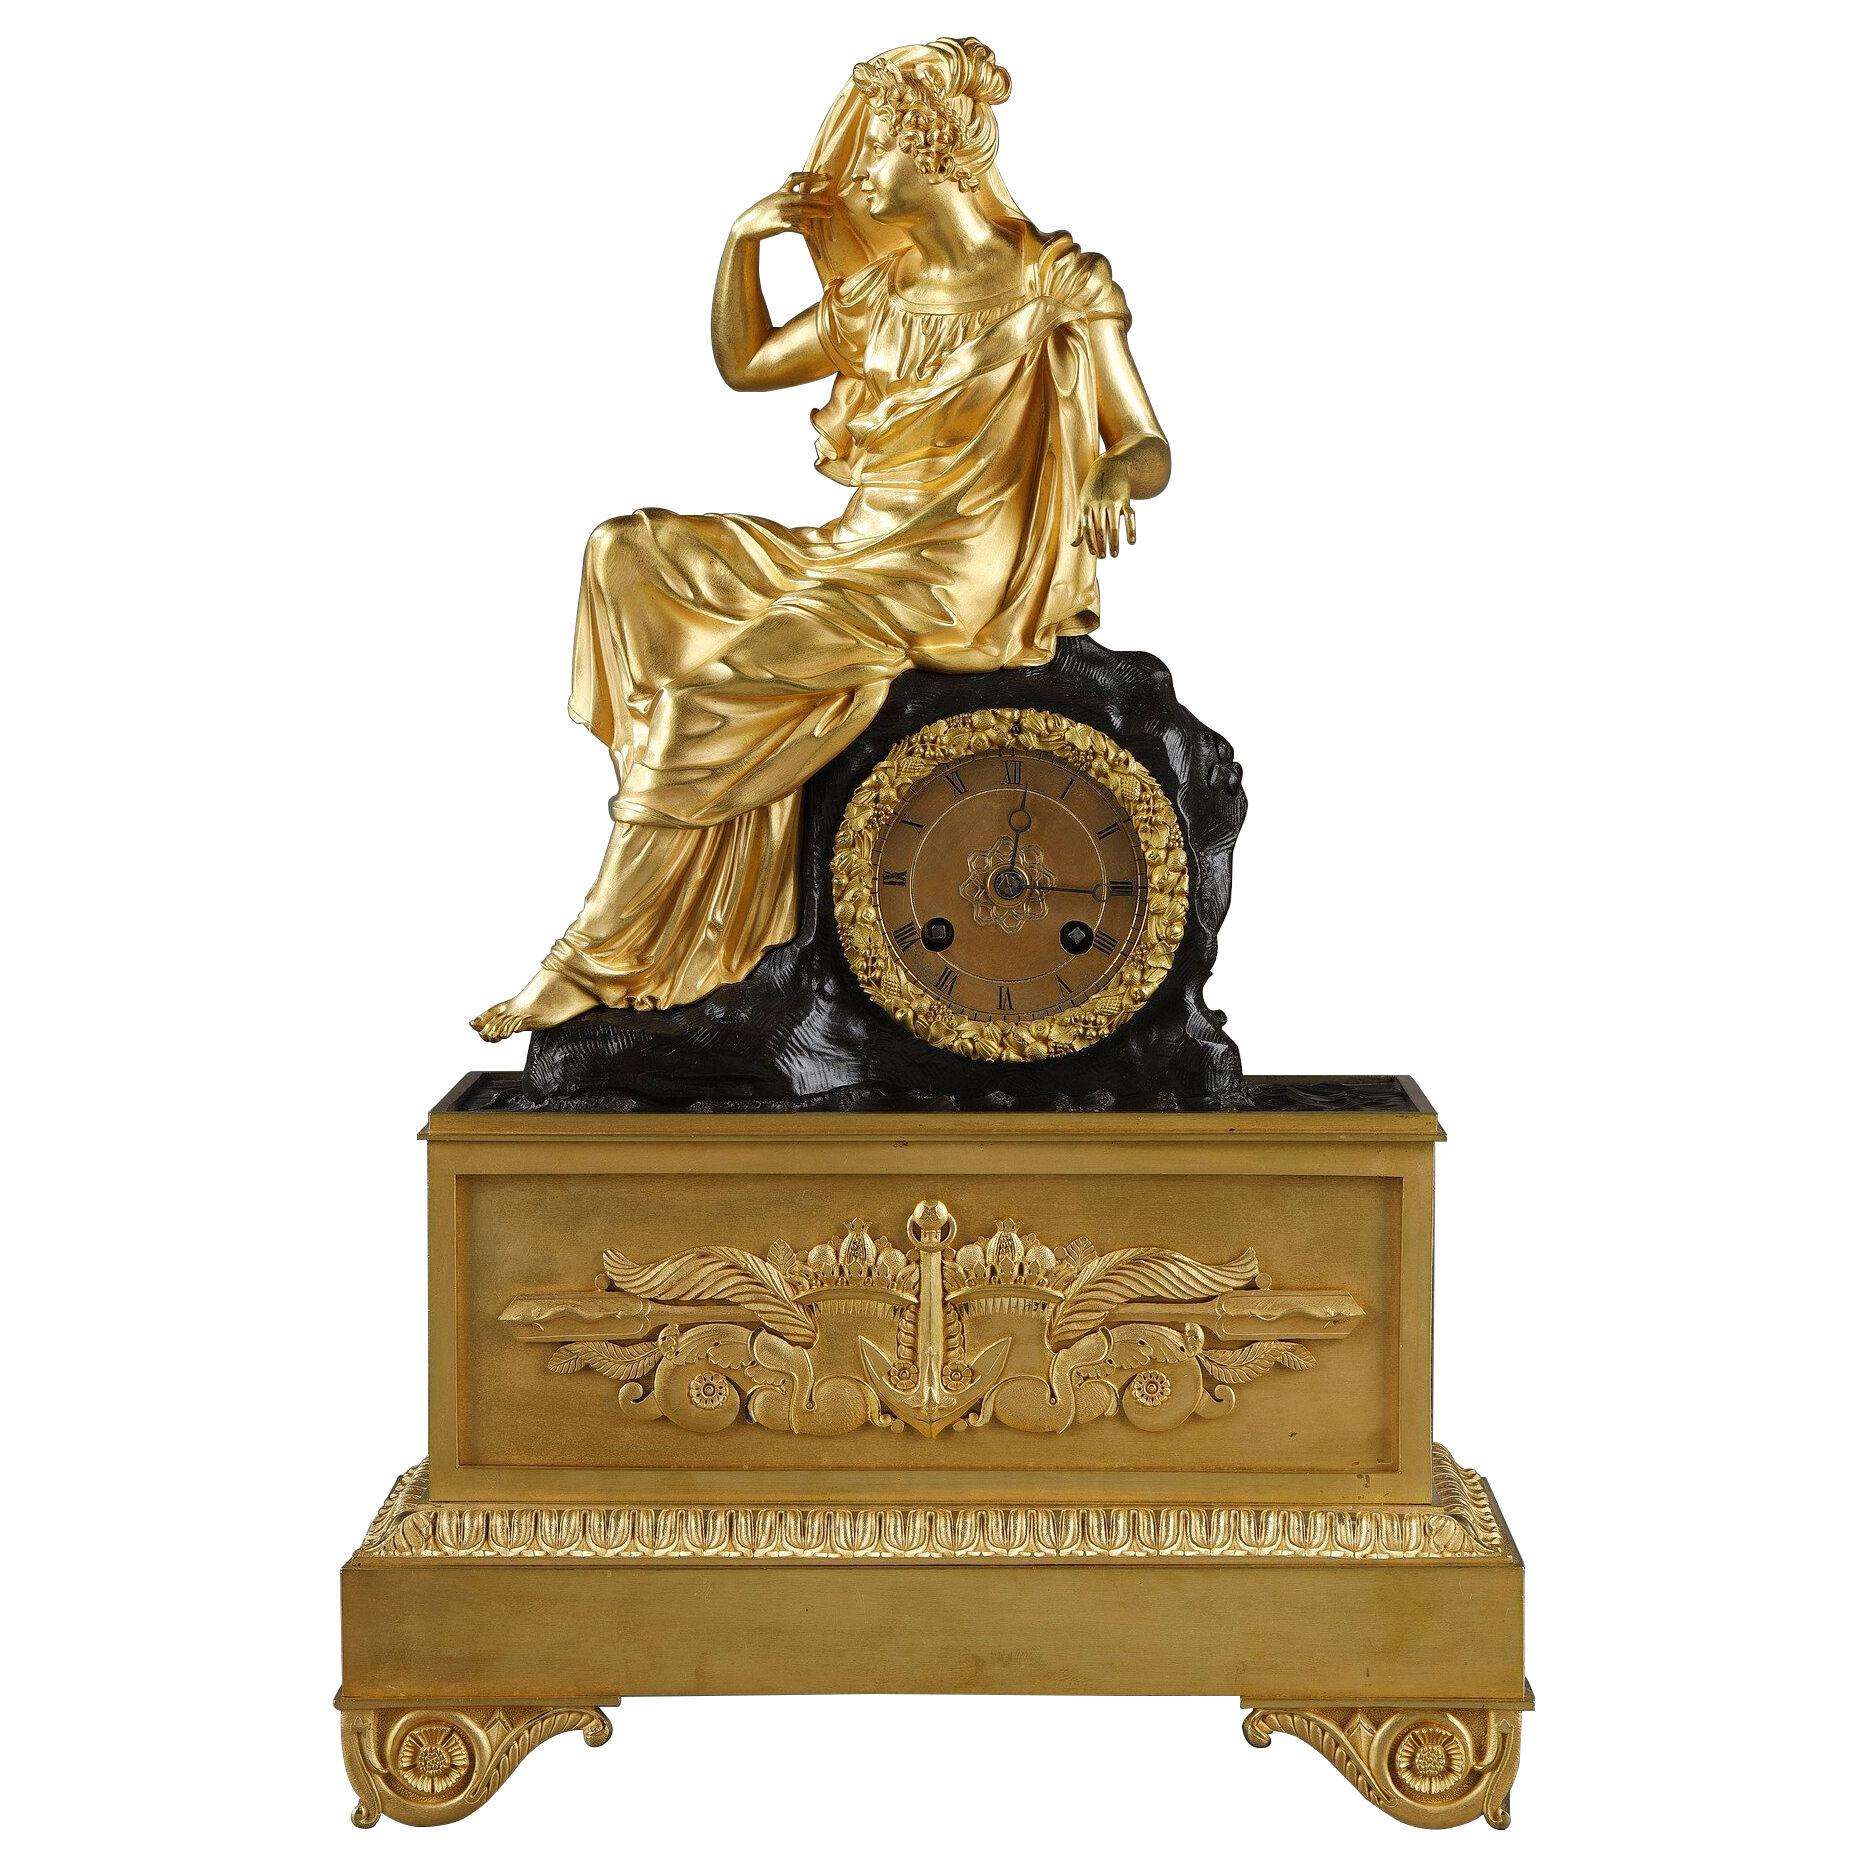 Restoration period Clock in gilt bronze with a young woman